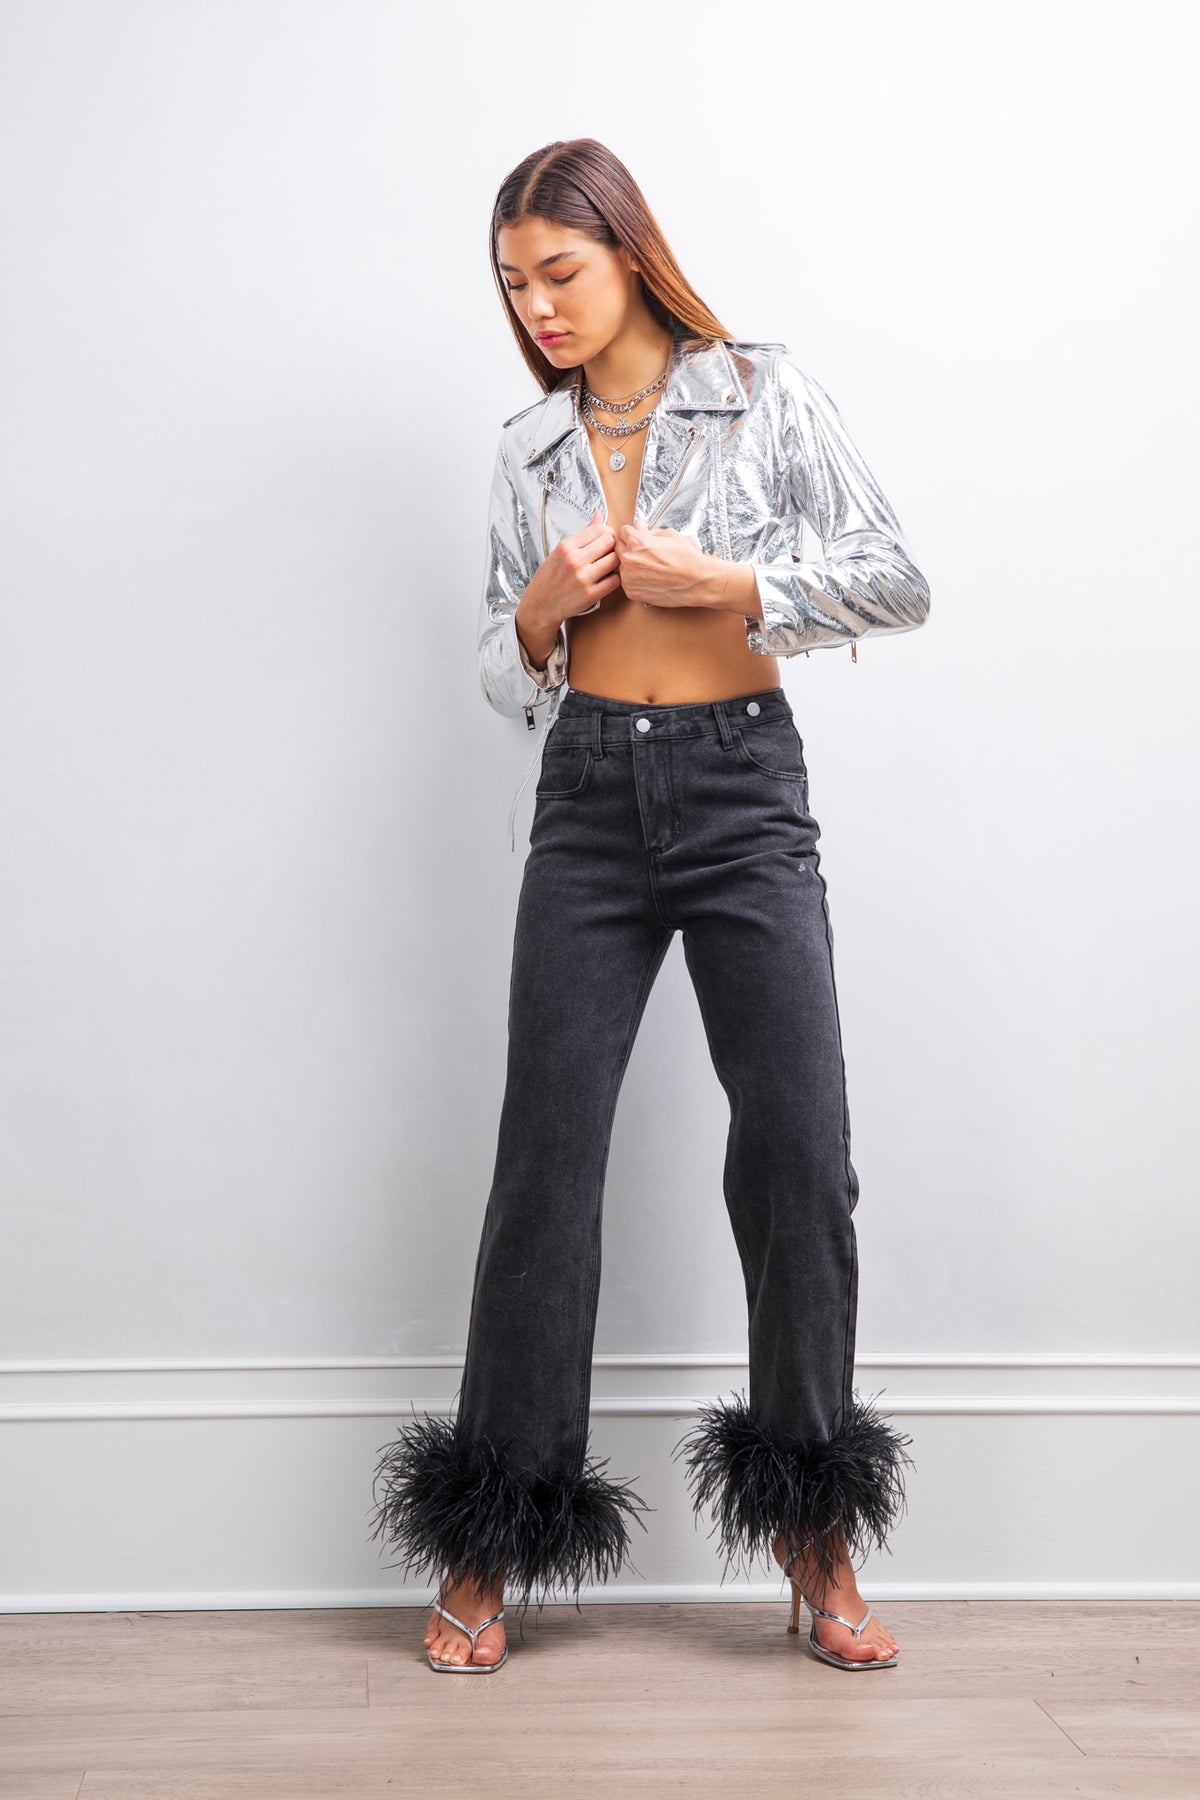 The Sable cropped leather jacket in Silver